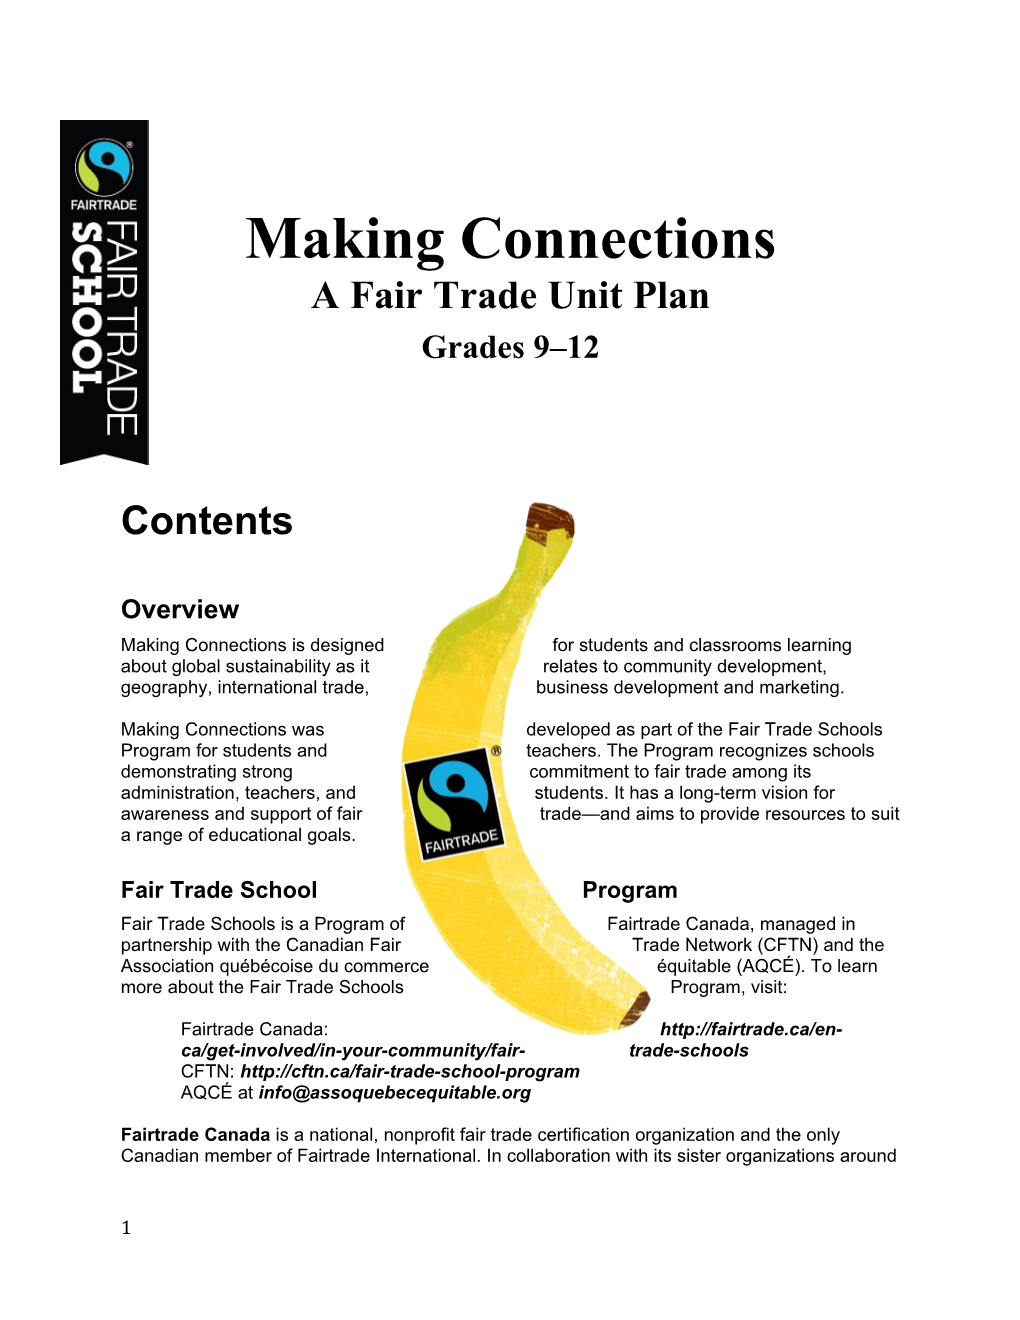 Making Connections a Fair Trade Unit Plan